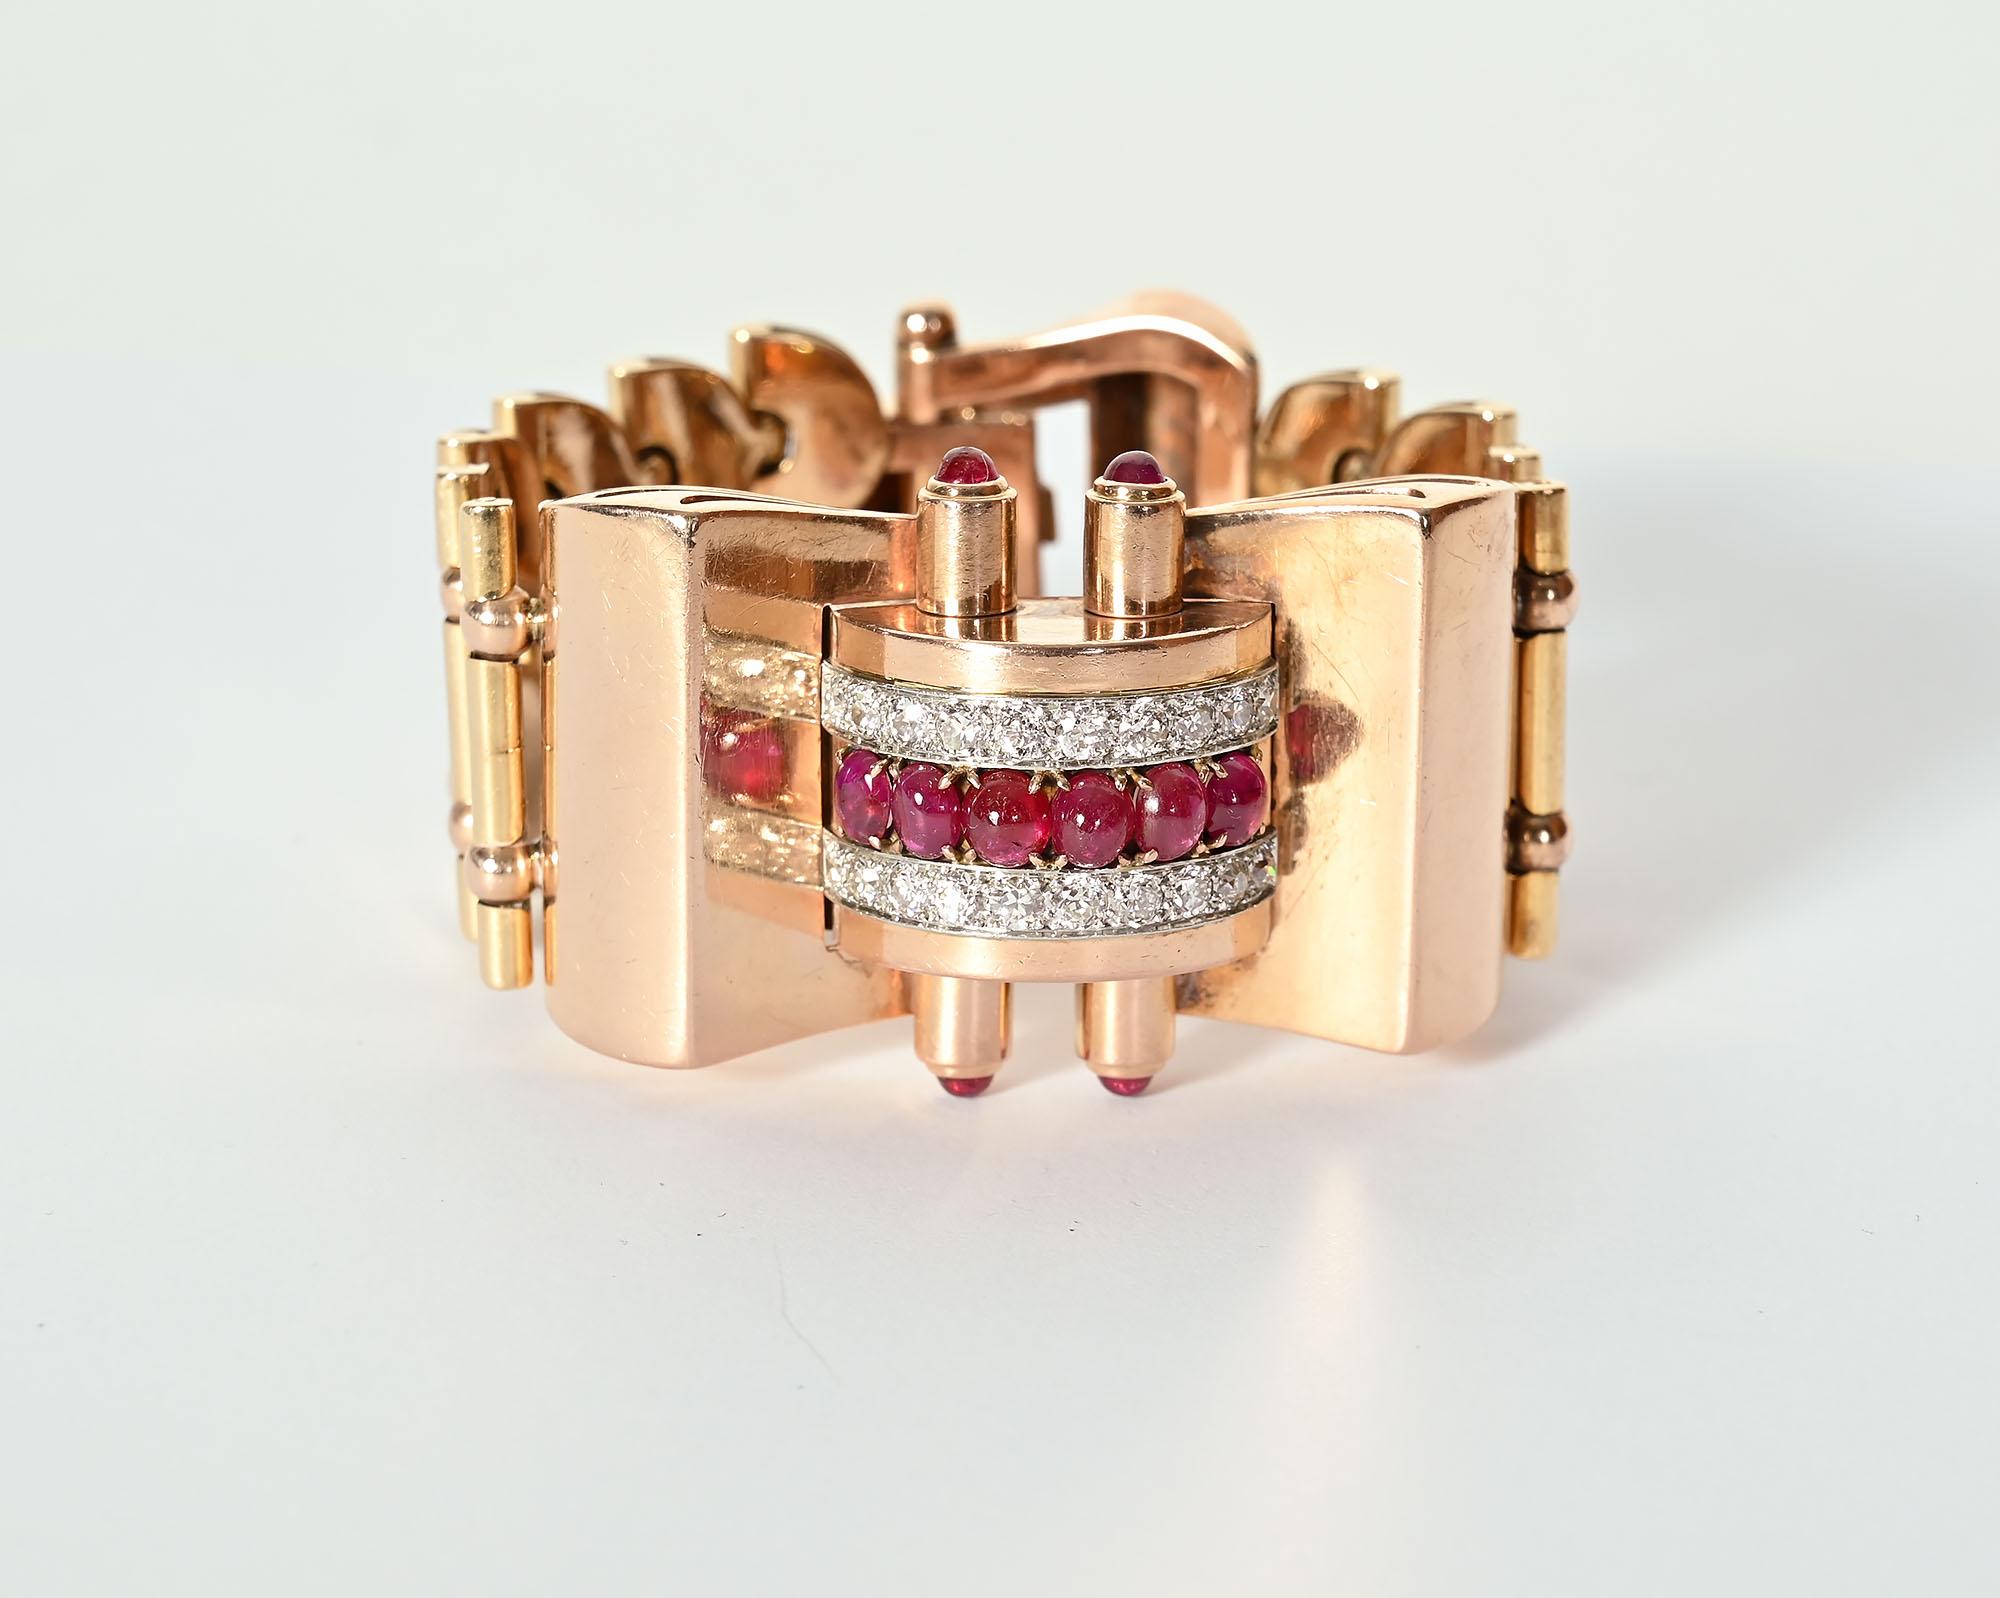 Unusual Retro bracelet of rose qold with a clasp of diamonds and rubies.  The bracelet has 18 old European cut diamonds weighing a total of 3.06 carats; G color and SI 1 clarity. It has six oval cabochon rubies, The links are an unusual row of